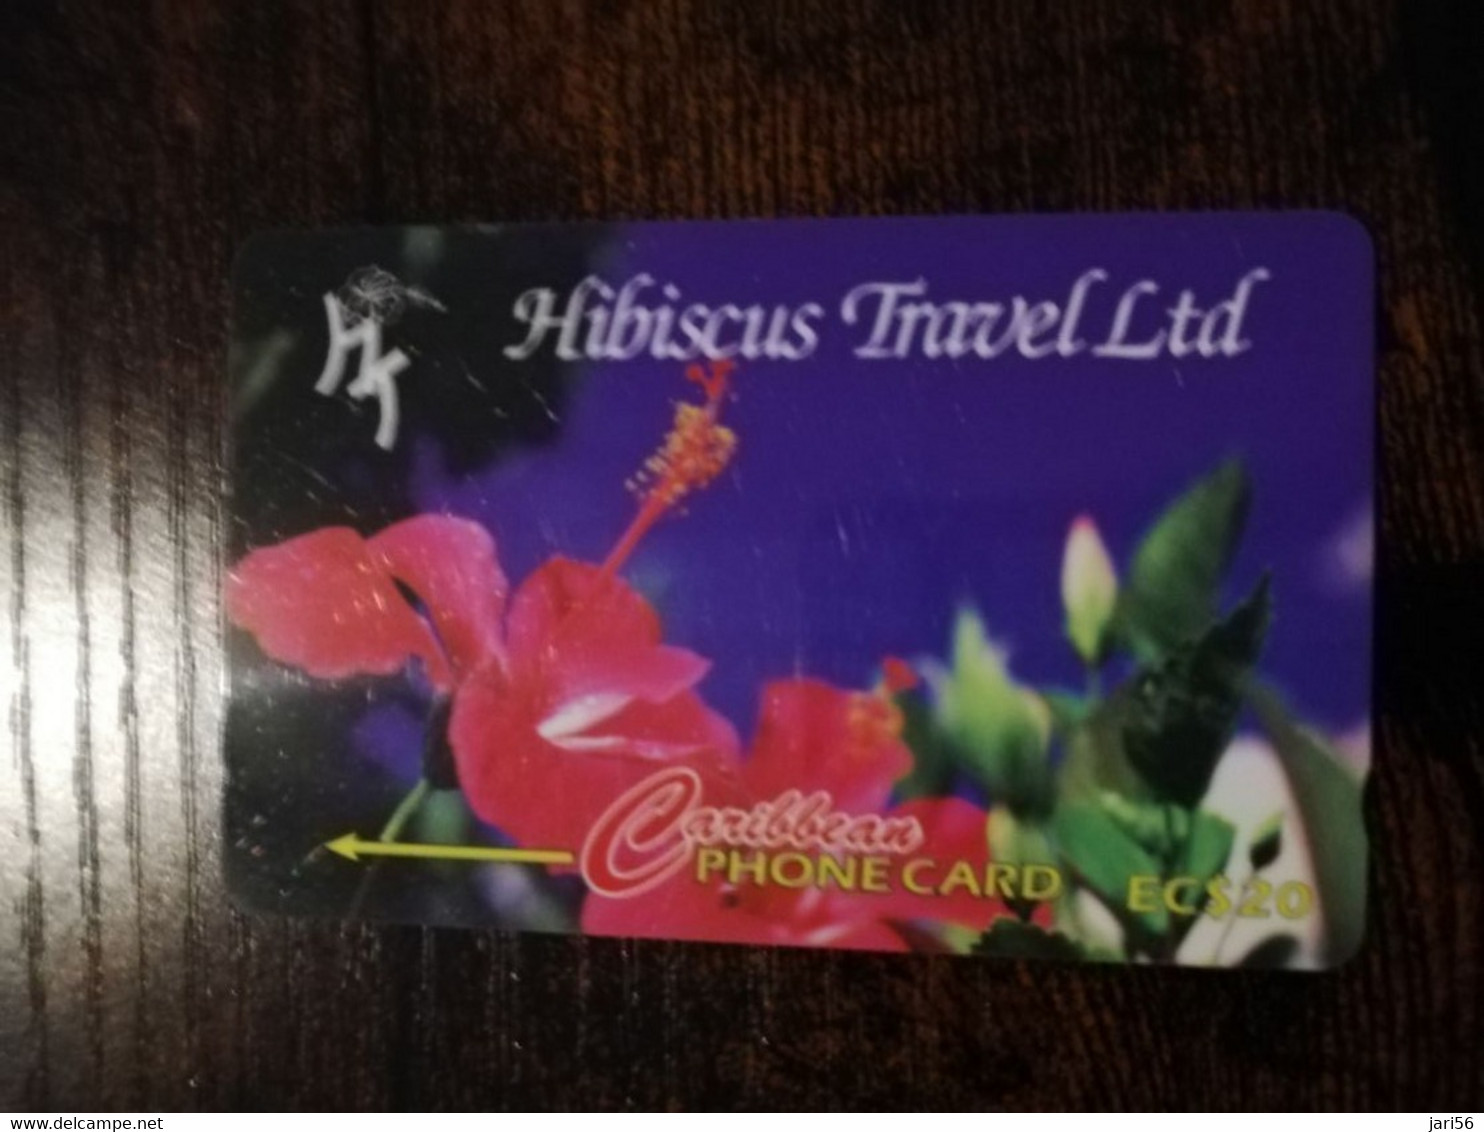 ST LUCIA    $ 20,-    CABLE & WIRELESS  STL-14AF  147CSLA  HIBISCUS TRAVEL LTD 1997       Fine Used Card ** 6876** - St. Lucia